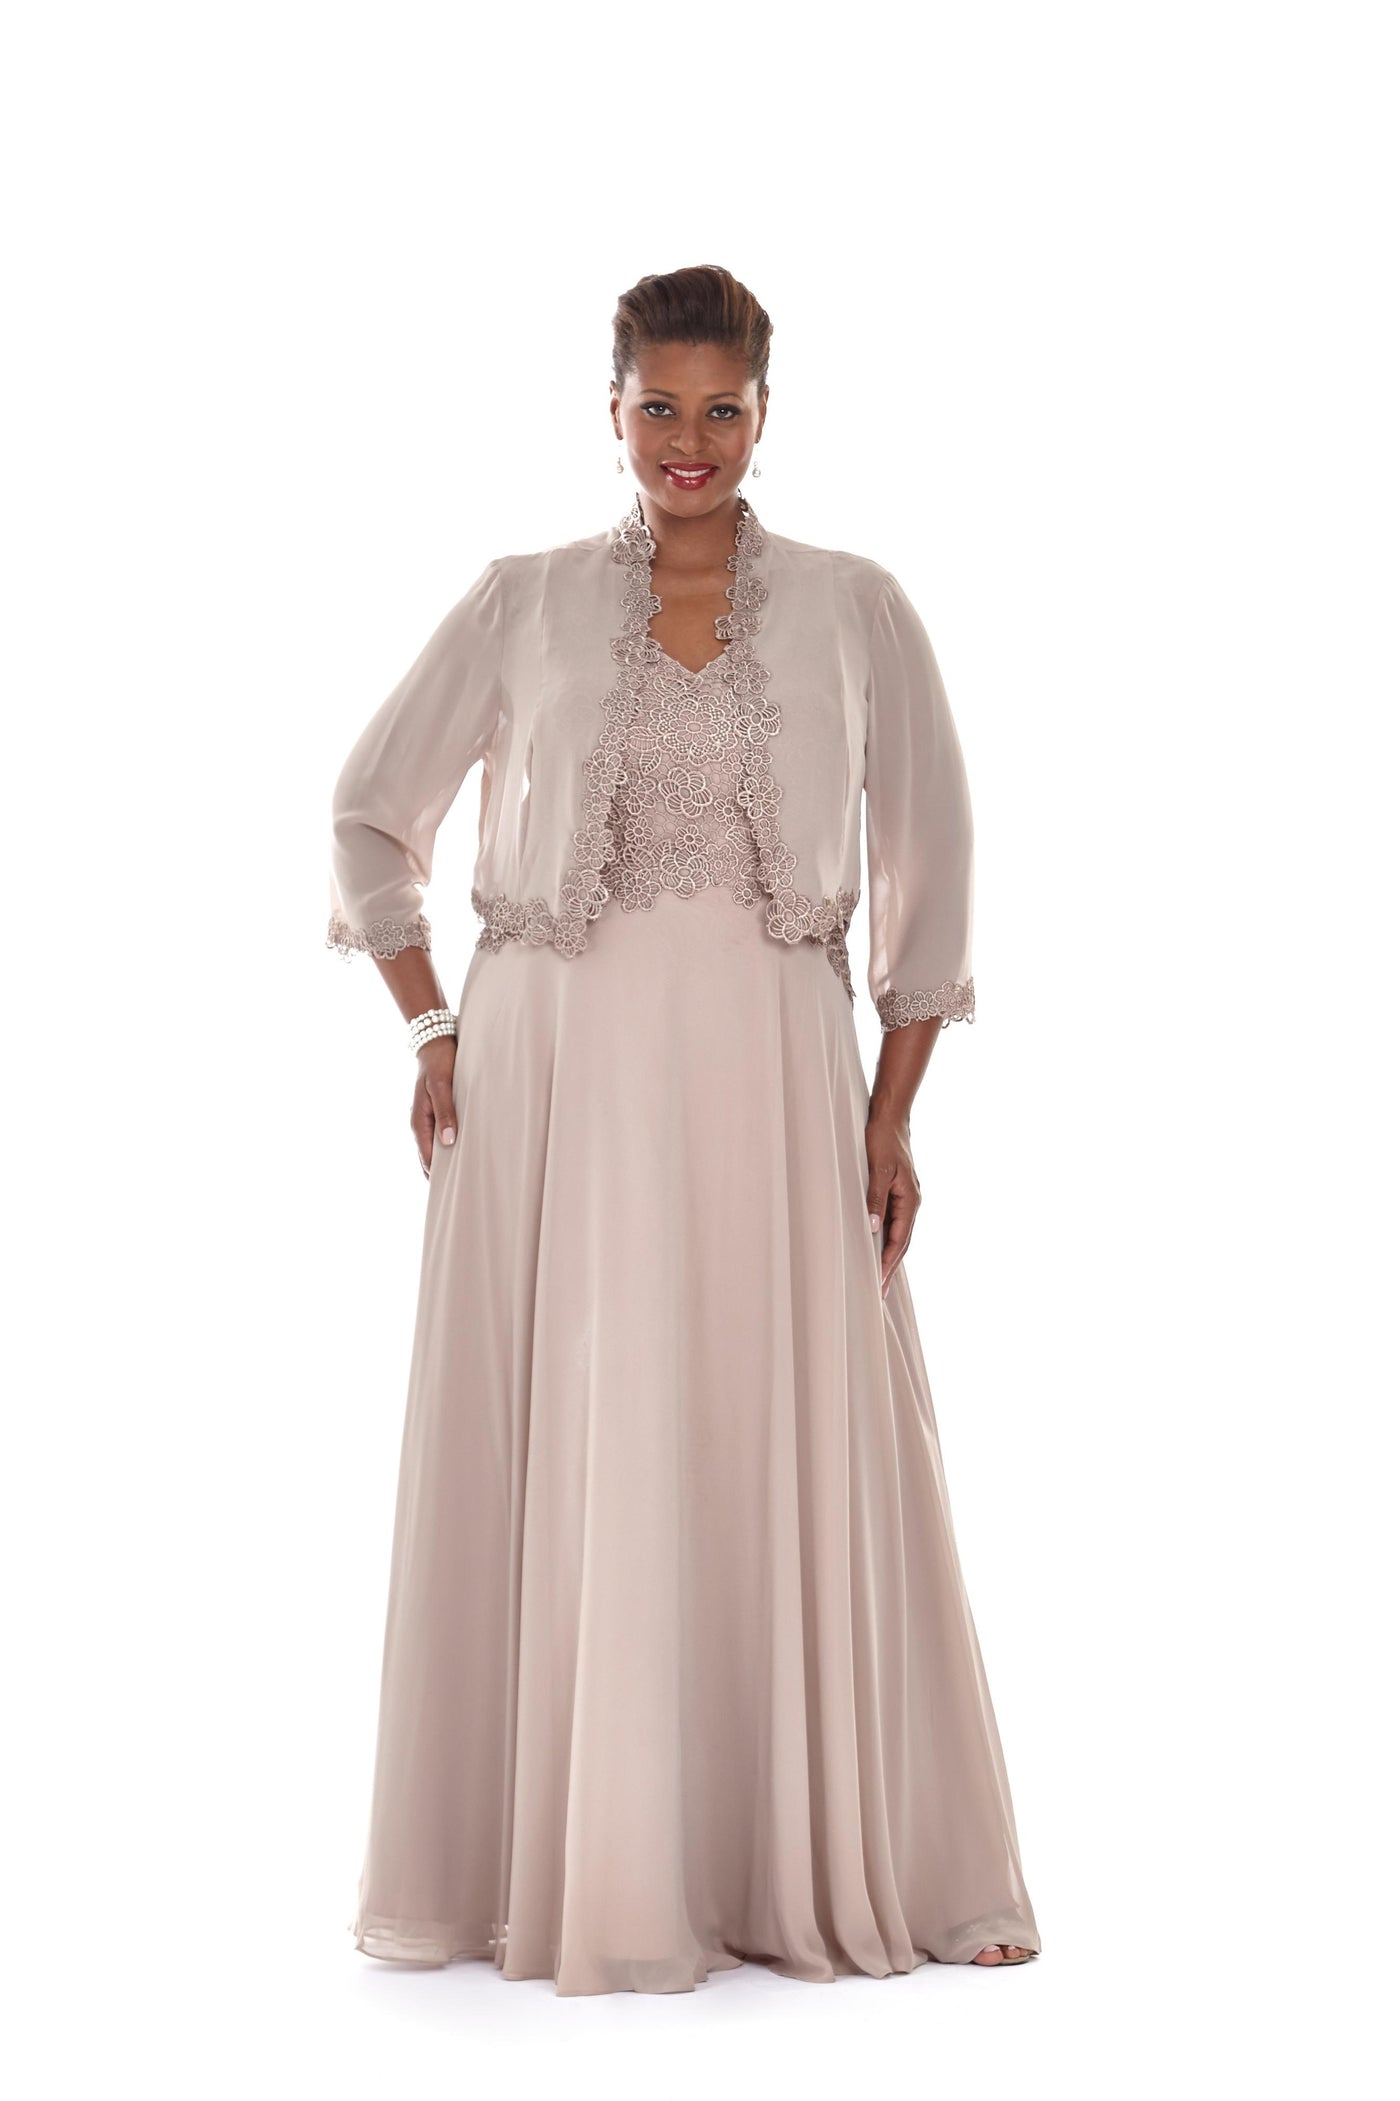 Vintage Style Mother of the Bride Jacket Gown by Sydney's Closet - SOLD OUT